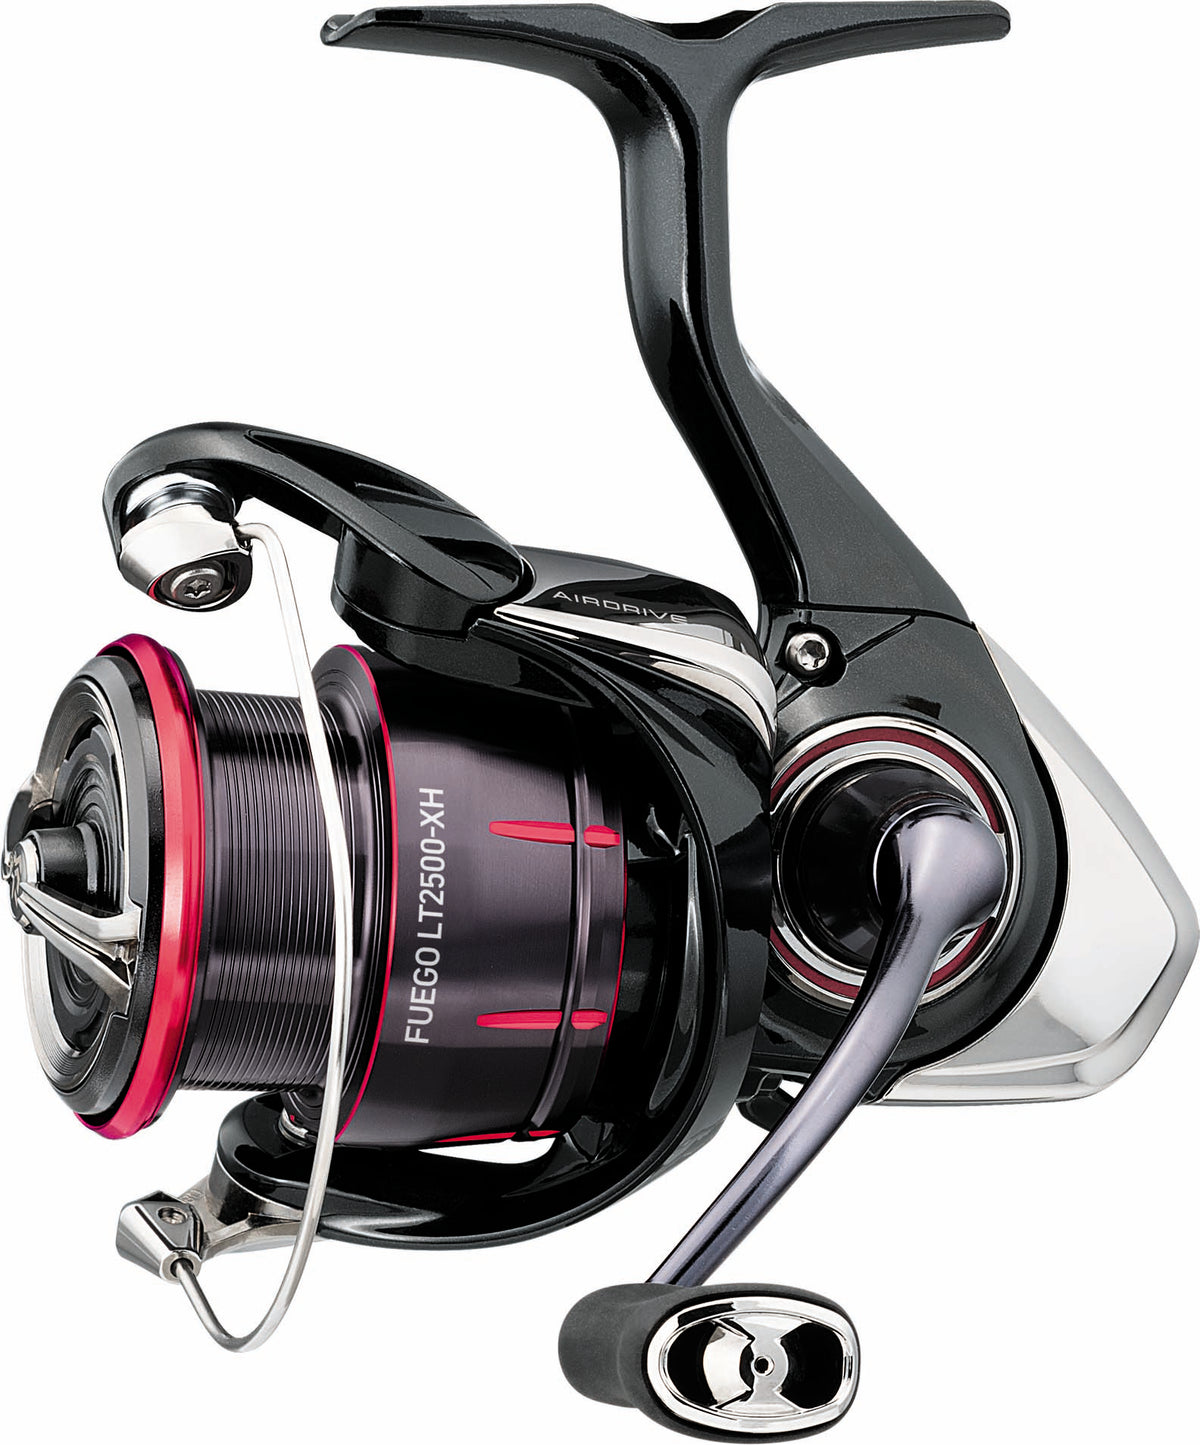 Daiwa Fuego LT Spinning Reel 2500D-XH 2500 Series Excellent Condition #4 -  Pioneer Recycling Services